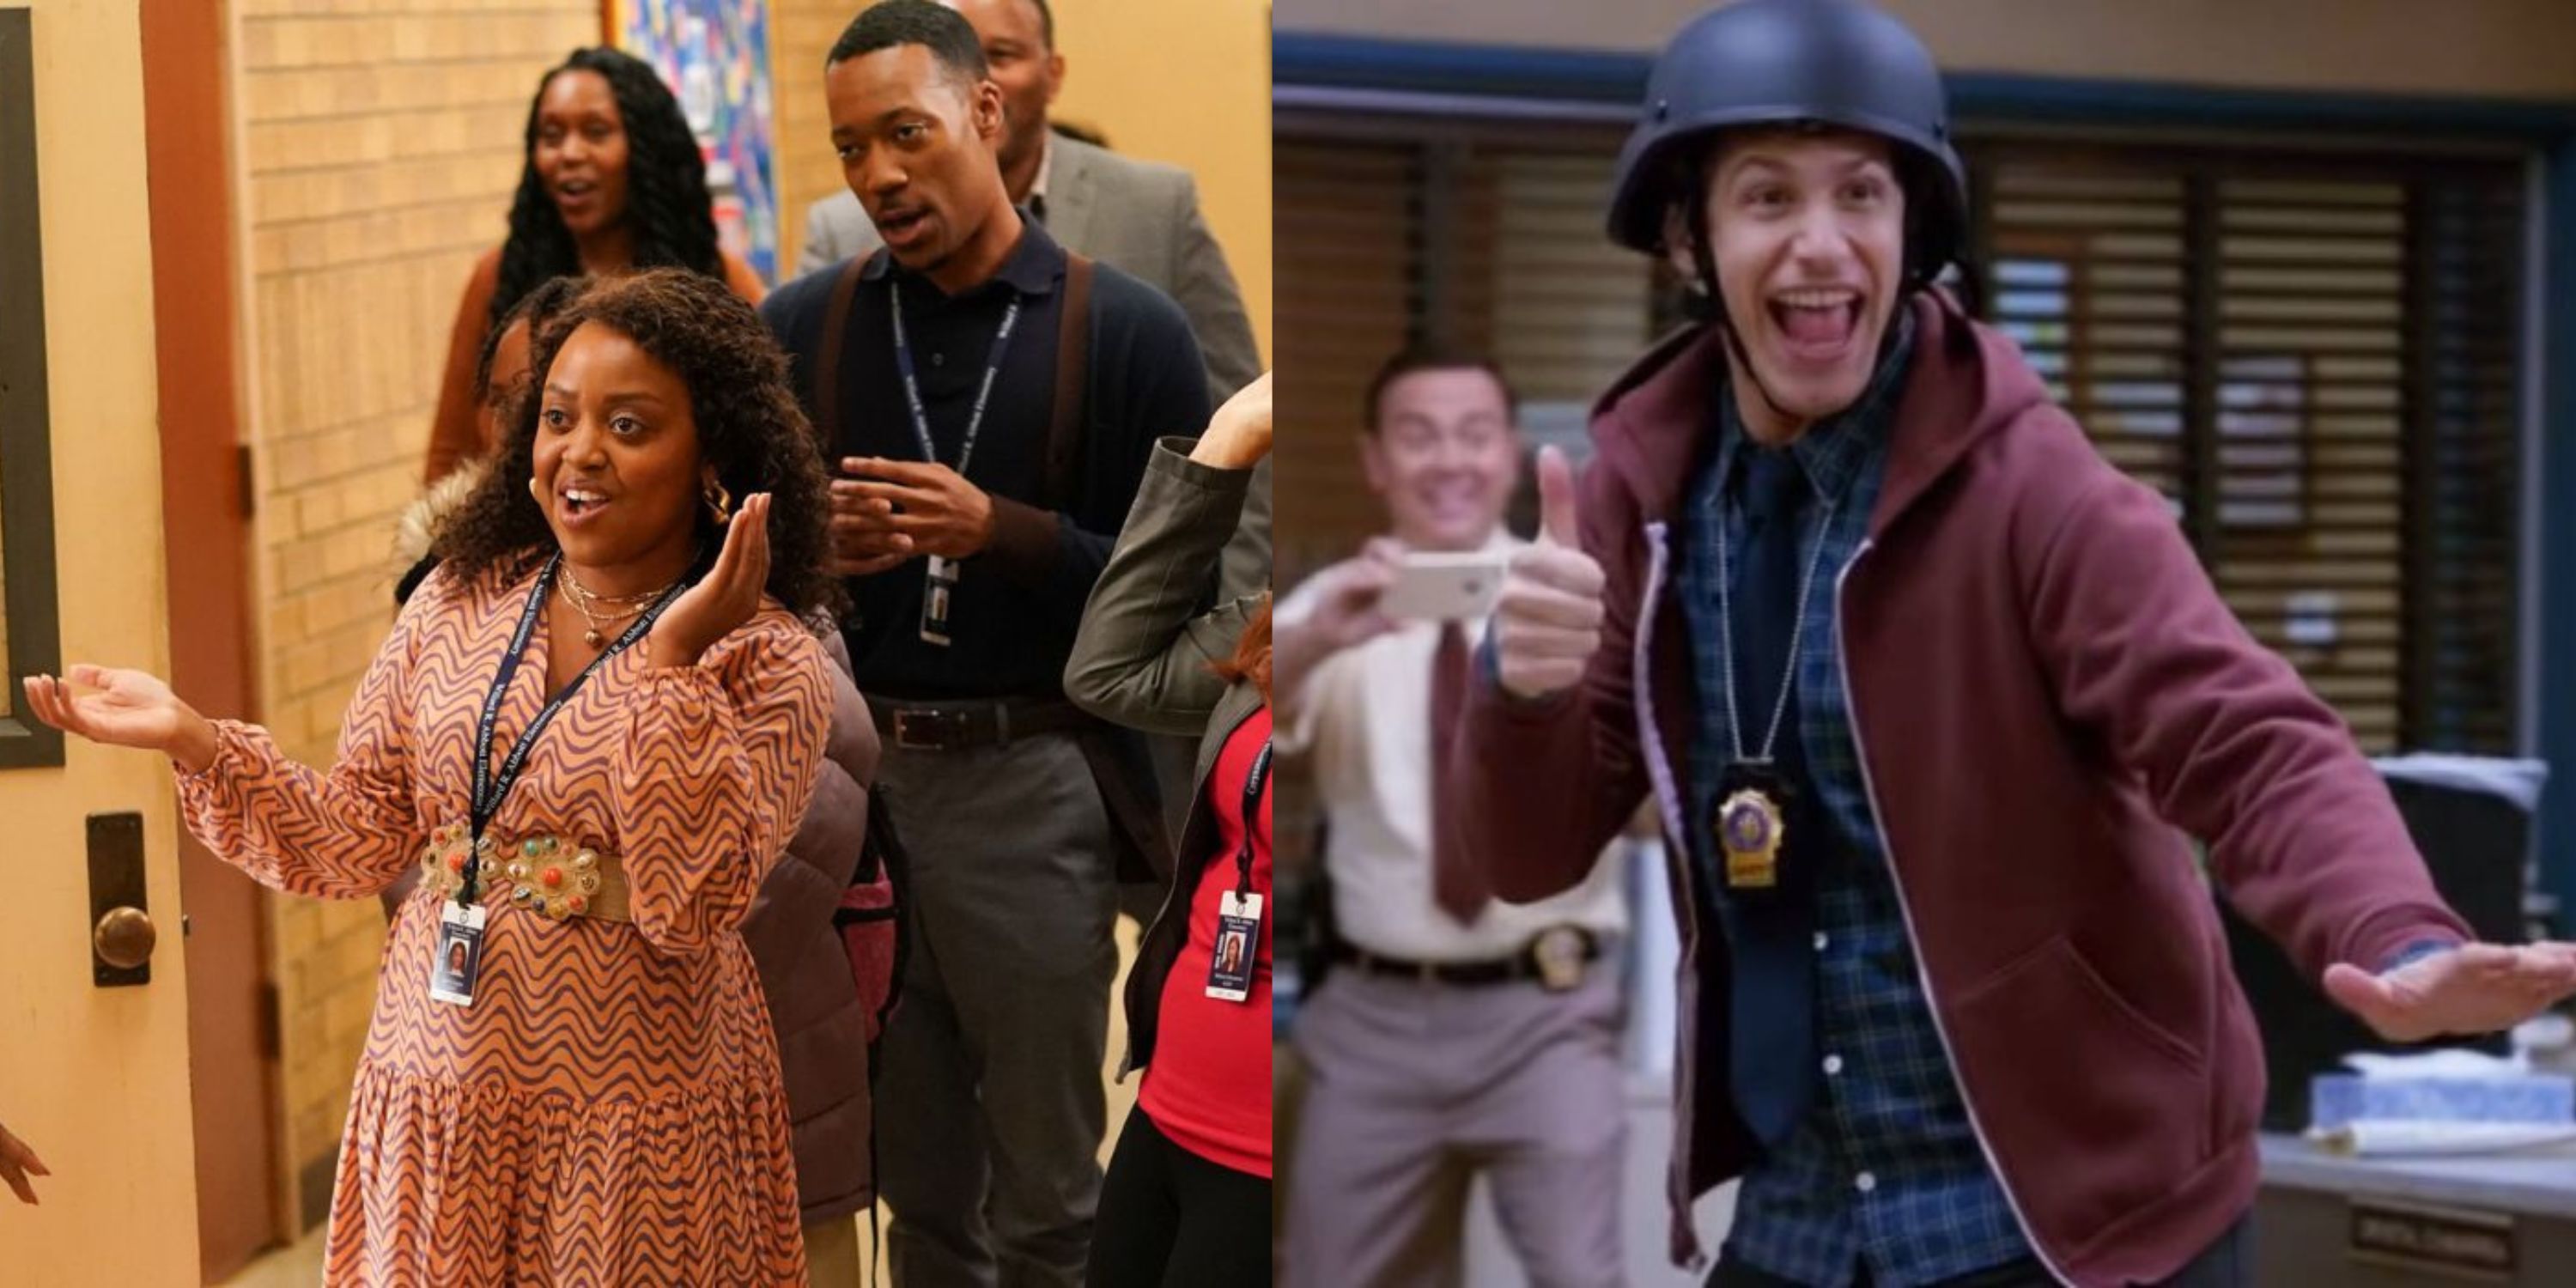 Featured image Janine in Abbott Elementary and Jake Peralta in Brooklyn 99